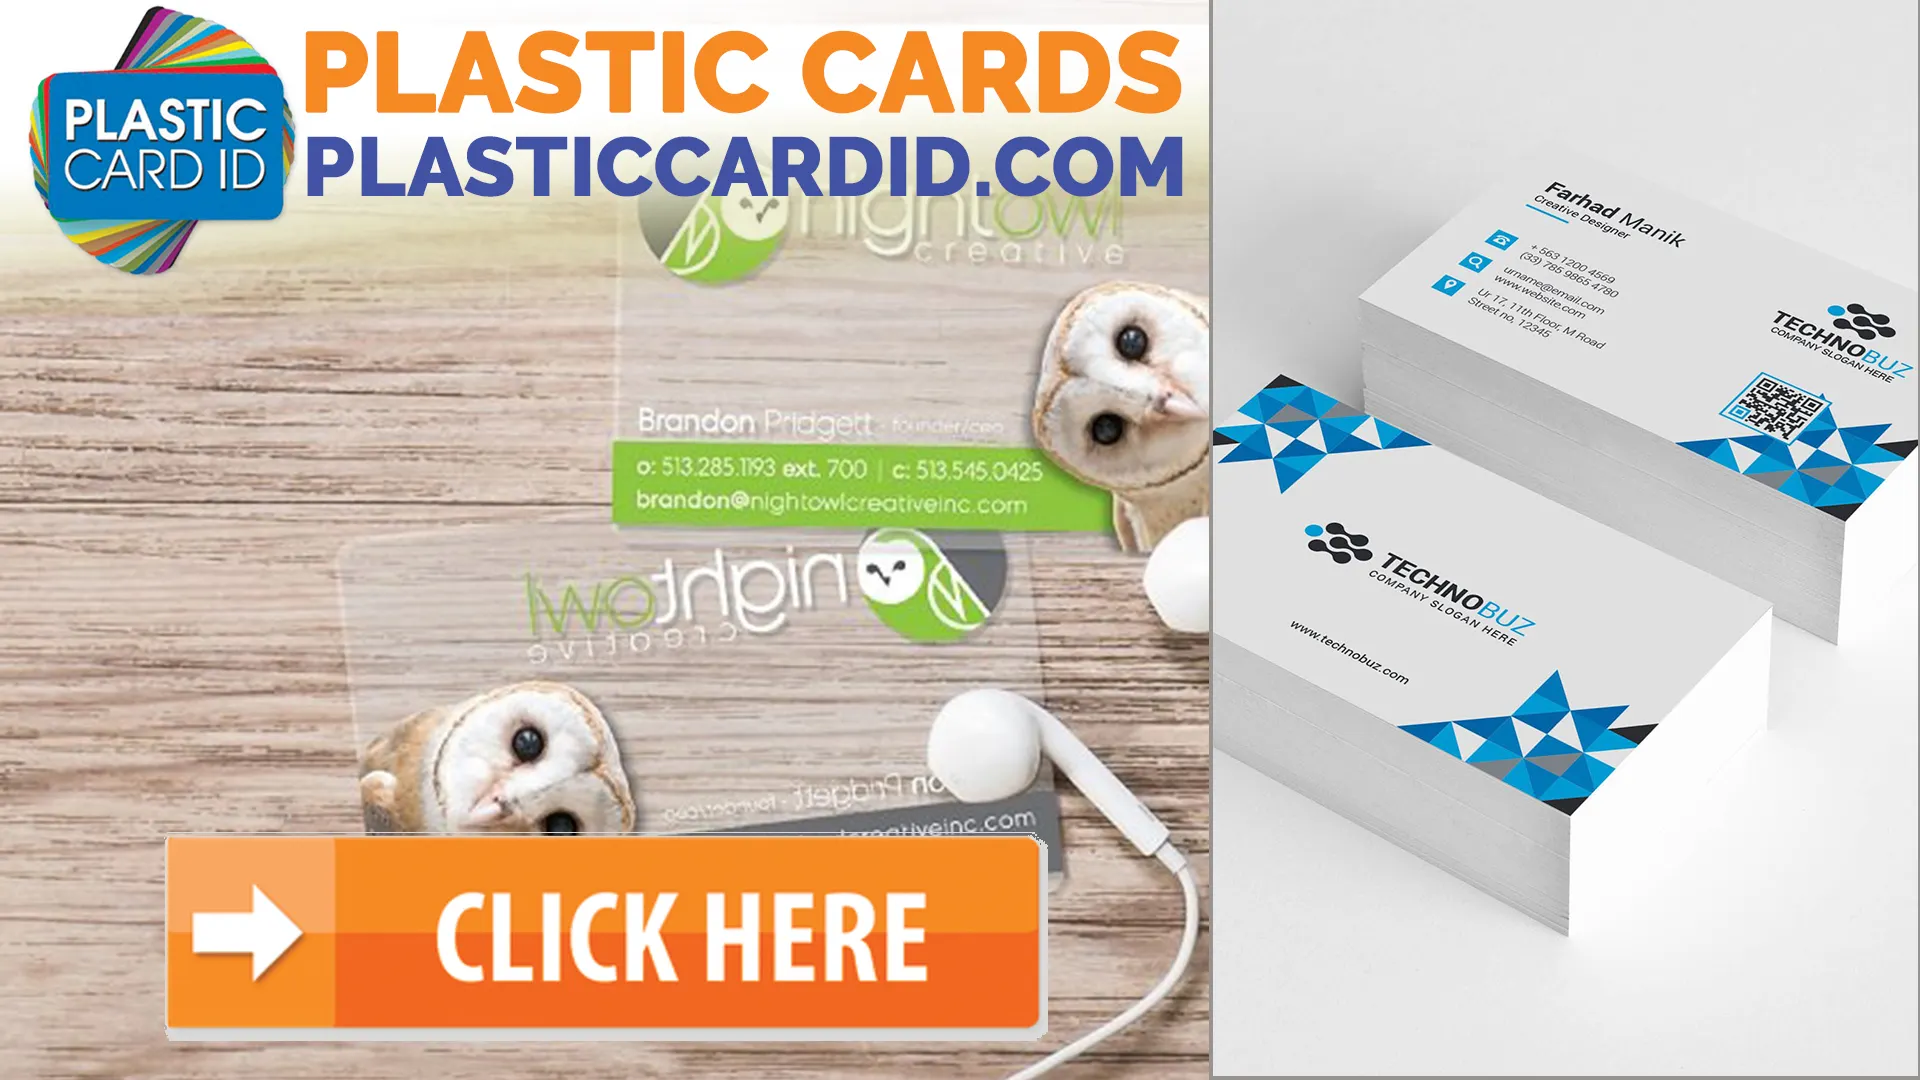 Personalized Plastic Cards-Reflecting Your Brand Identity